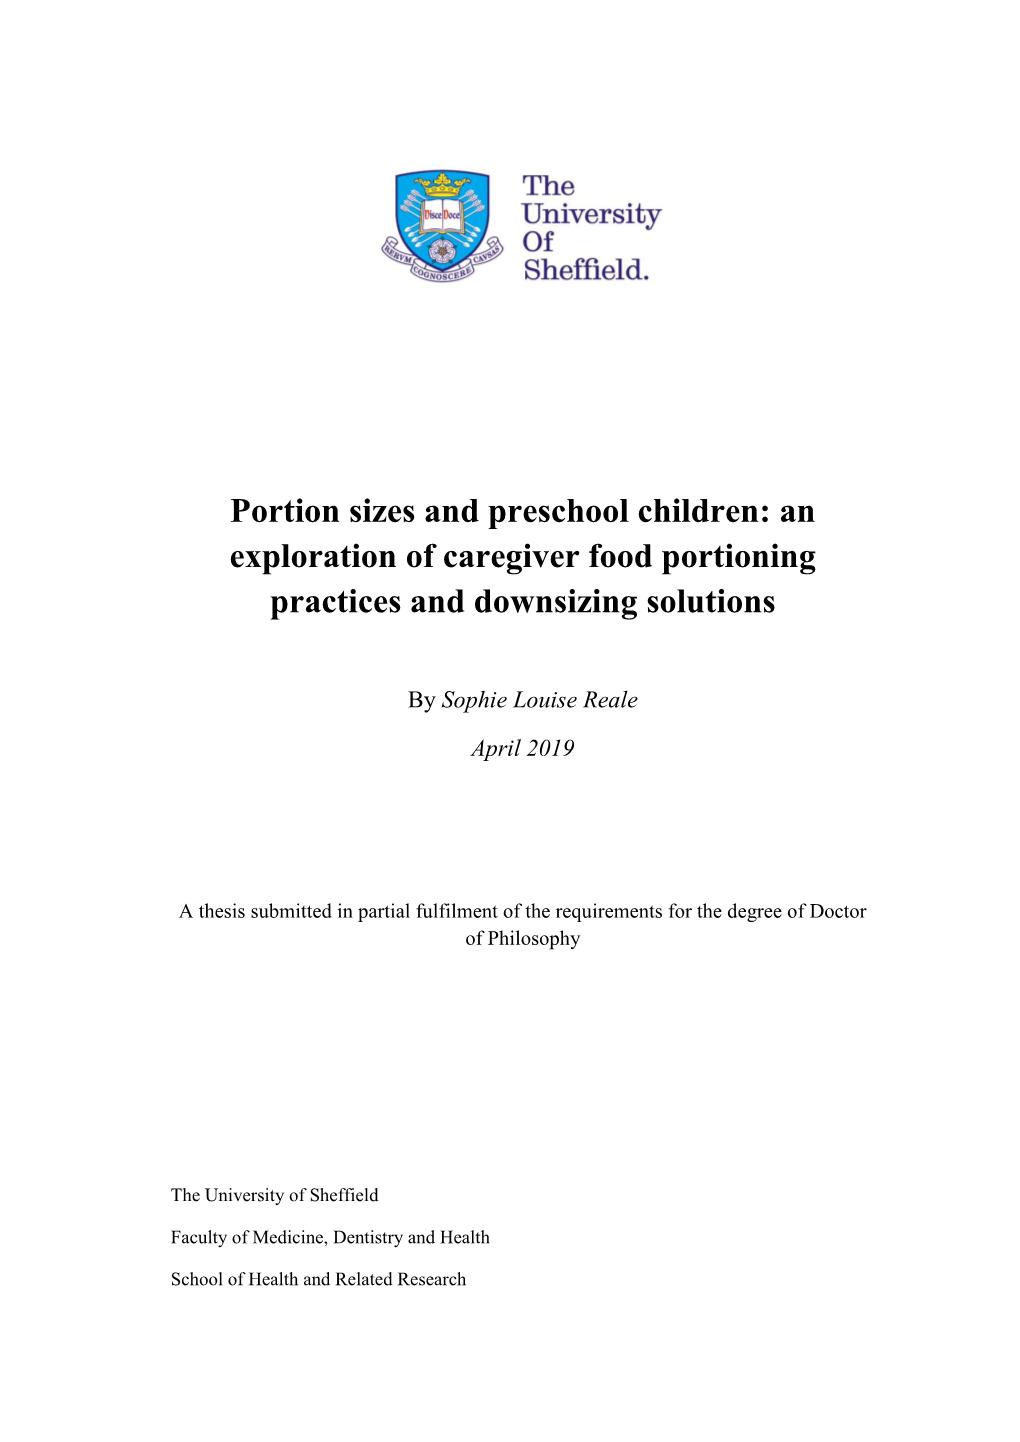 Portion Sizes and Preschool Children: an Exploration of Caregiver Food Portioning Practices and Downsizing Solutions